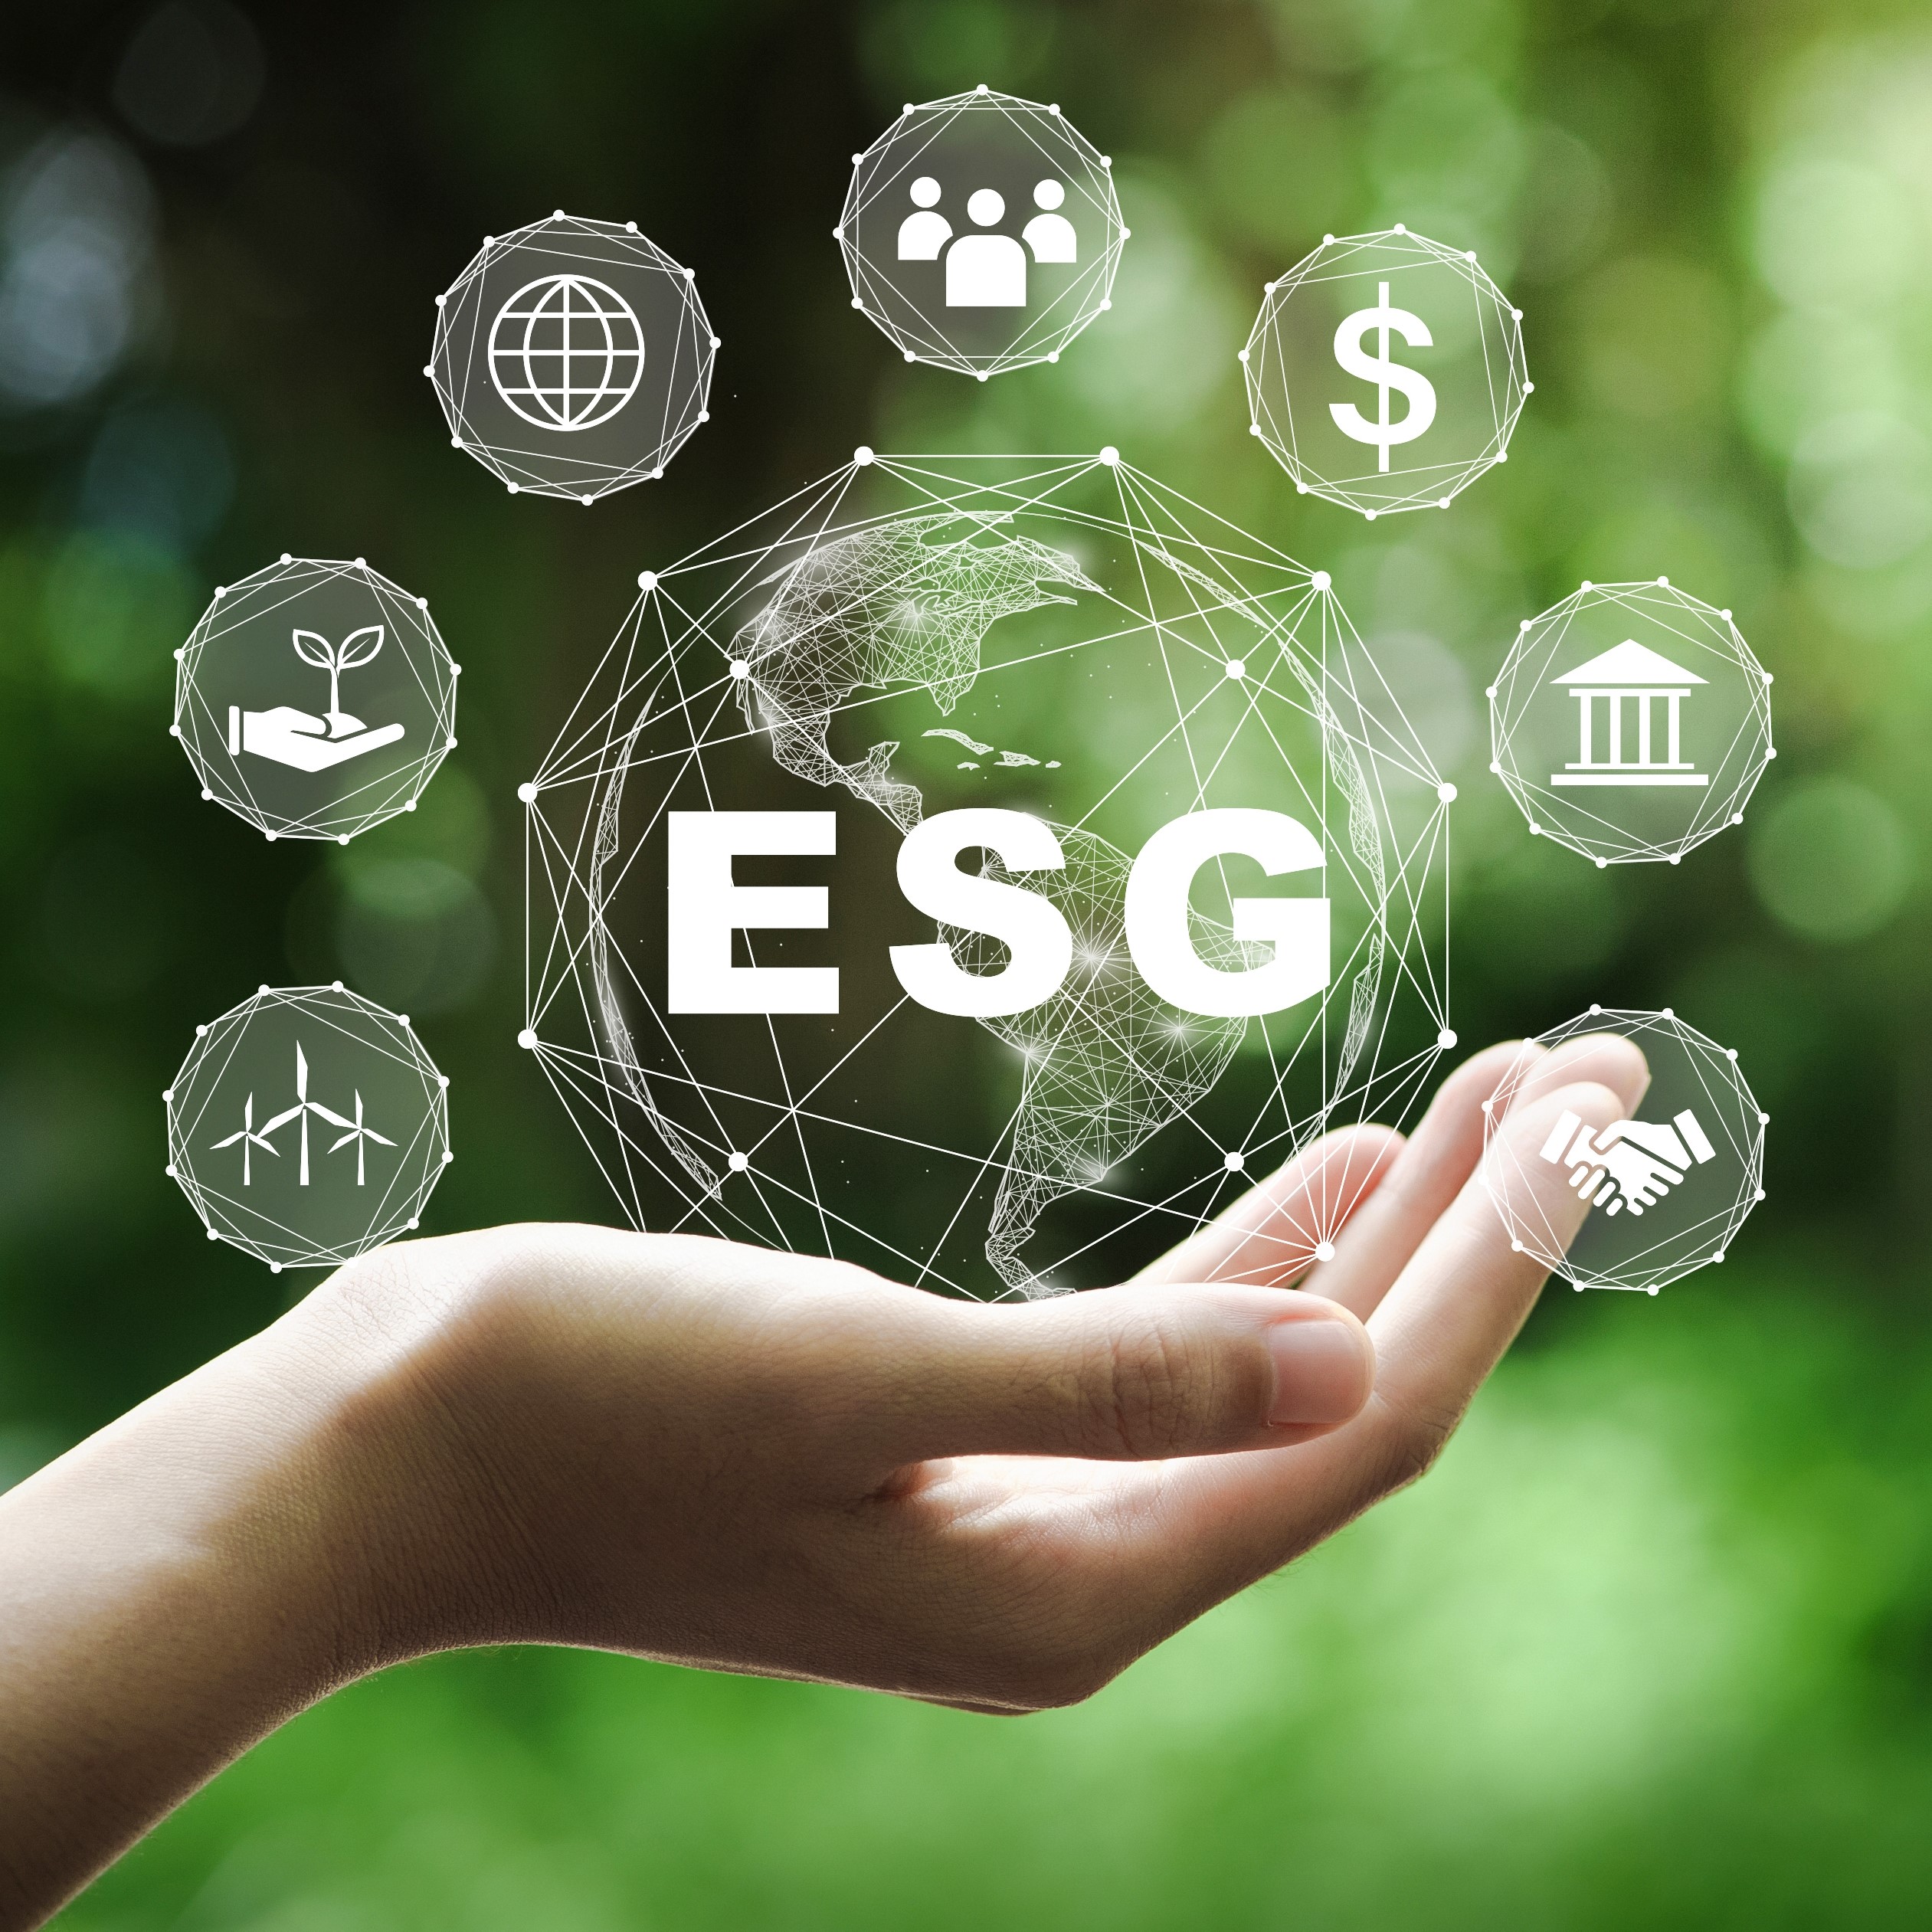 Real-time ESG data drives progress: take one step at a time